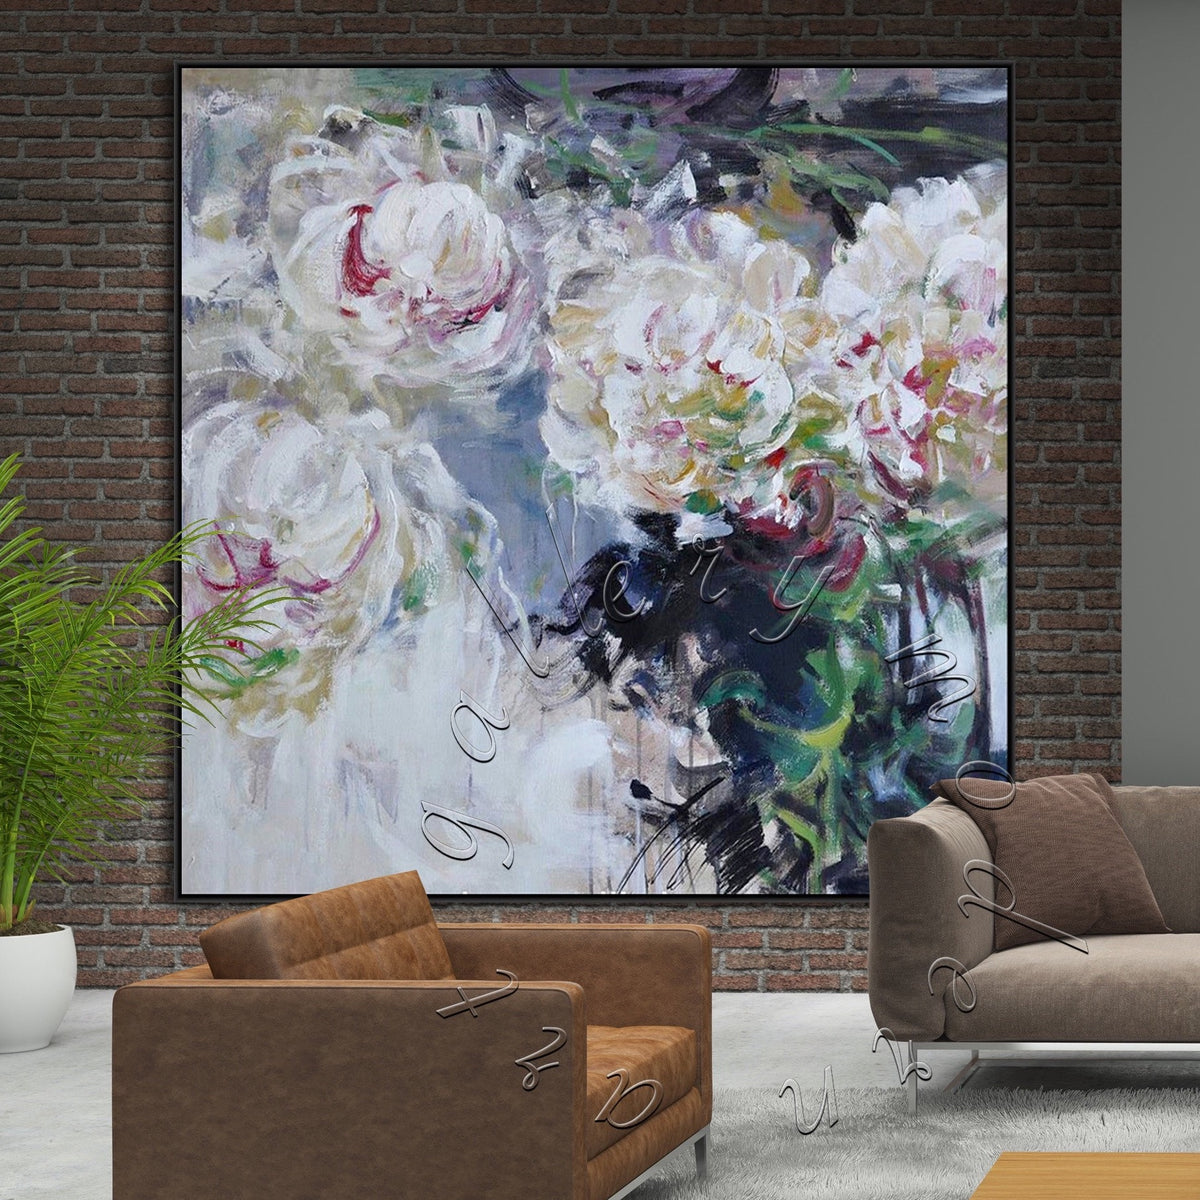 Abstract Painting, Textured Flowers, Peonies Painting on Canvas, Square Canvas Art